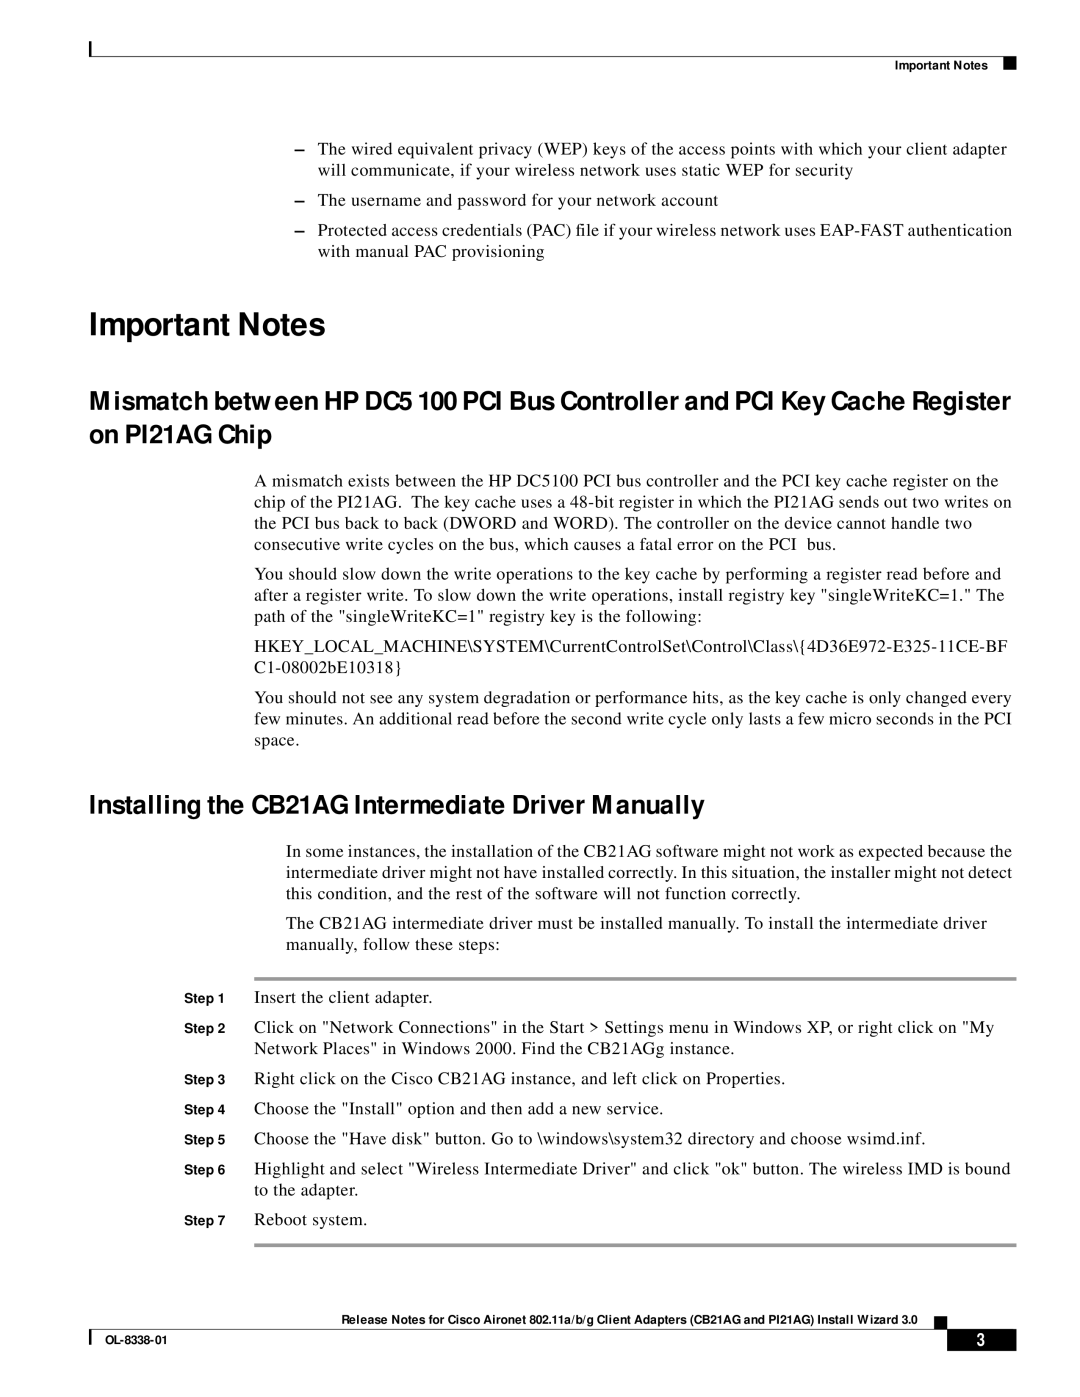 Cisco Systems CB21AG and PI21AG manual Important Notes, Installing the CB21AG Intermediate Driver Manually 